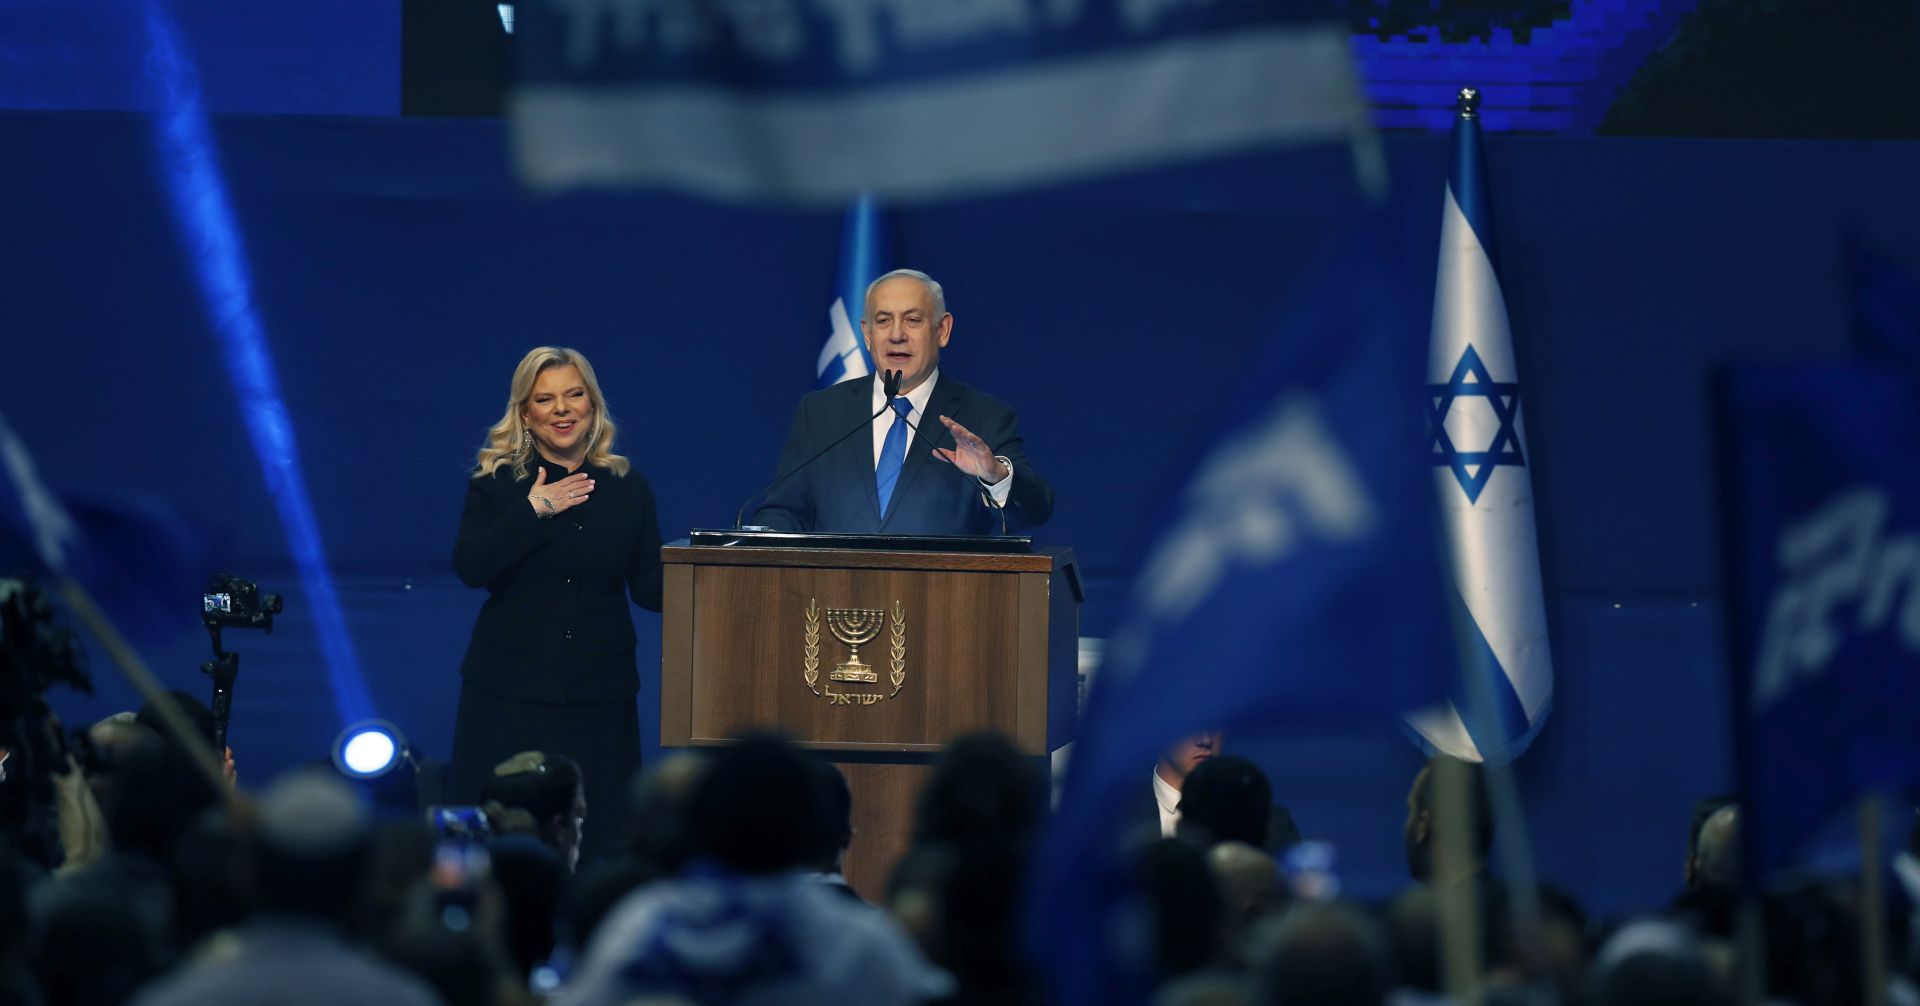 epa08265687 Israeli Prime Minister and Chairman of the Likud Party Benjamin Netanyahu (C, right) speaks to supporters at the Likud party final election event after early exit polls, in Tel Aviv, Israel, 03 March 2020. It is the third Israeli parliament election in one year.  EPA/ATEF SAFADI